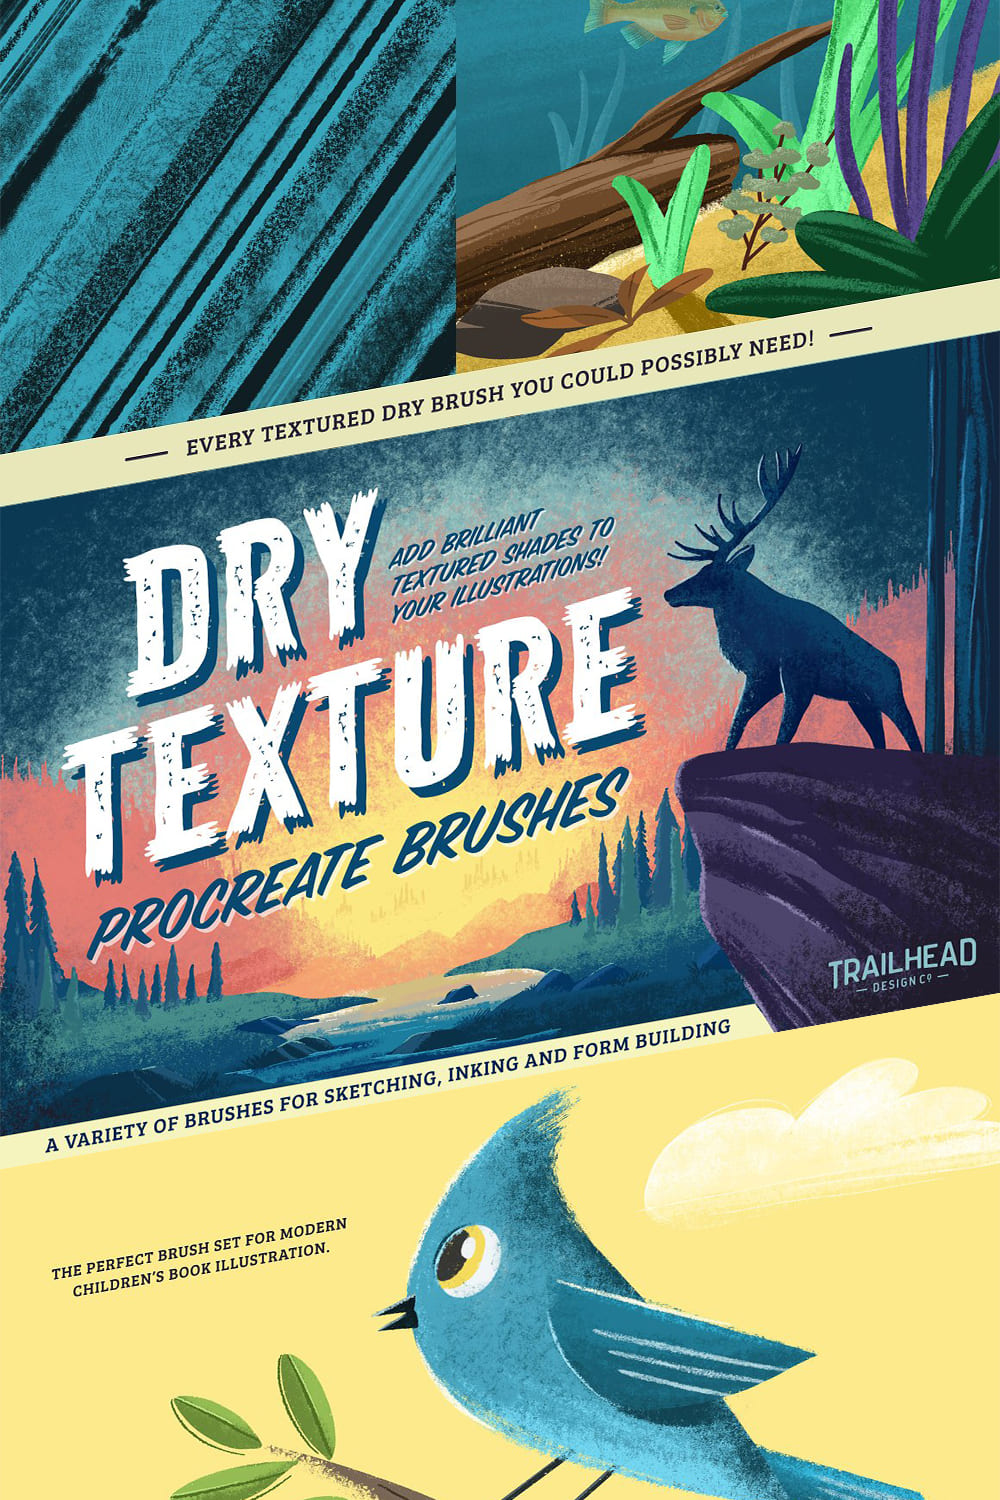 Cool bright brushes for modern project.